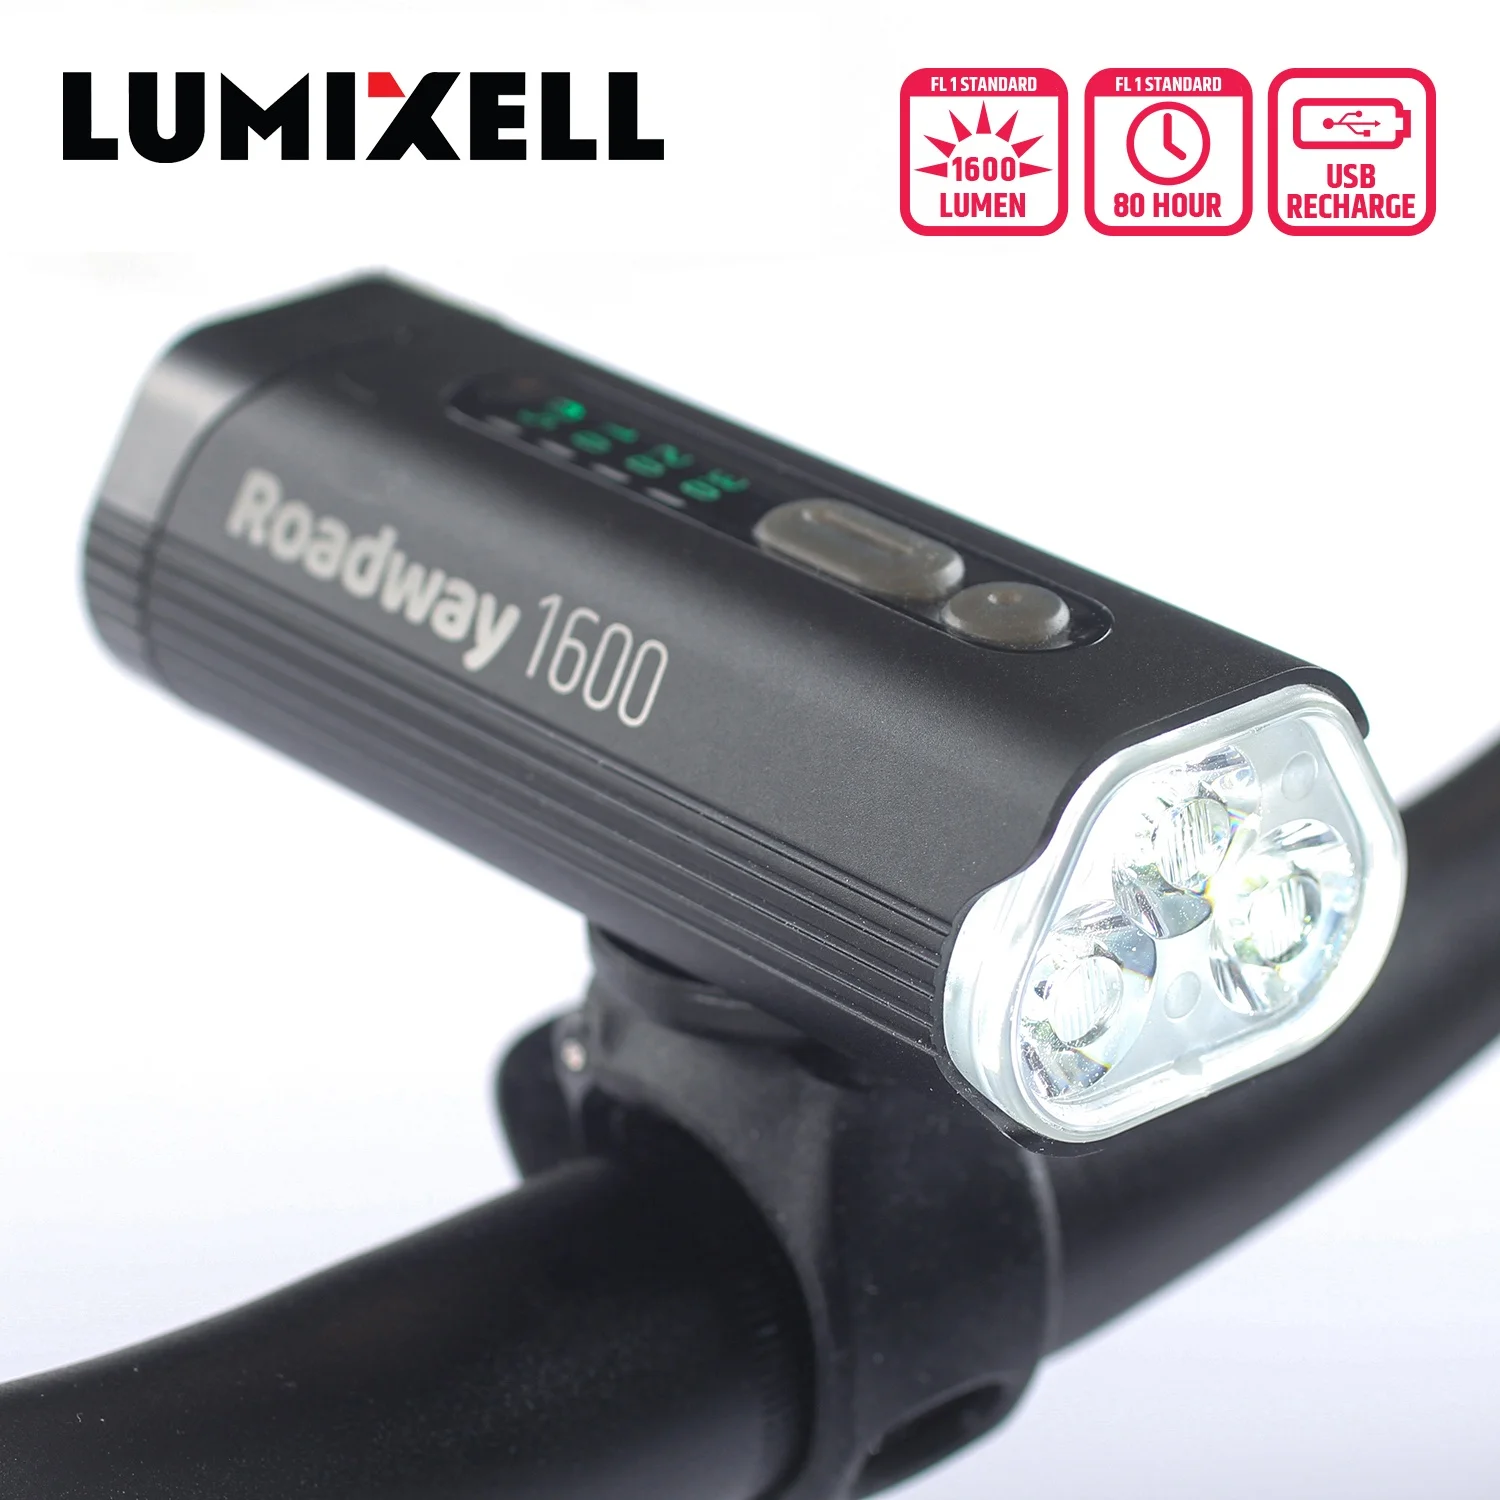 

Flash Sale New Arrival Professional Super Bright 1600 Lumen Bike Light Front USB Rechargeable with Power Bank